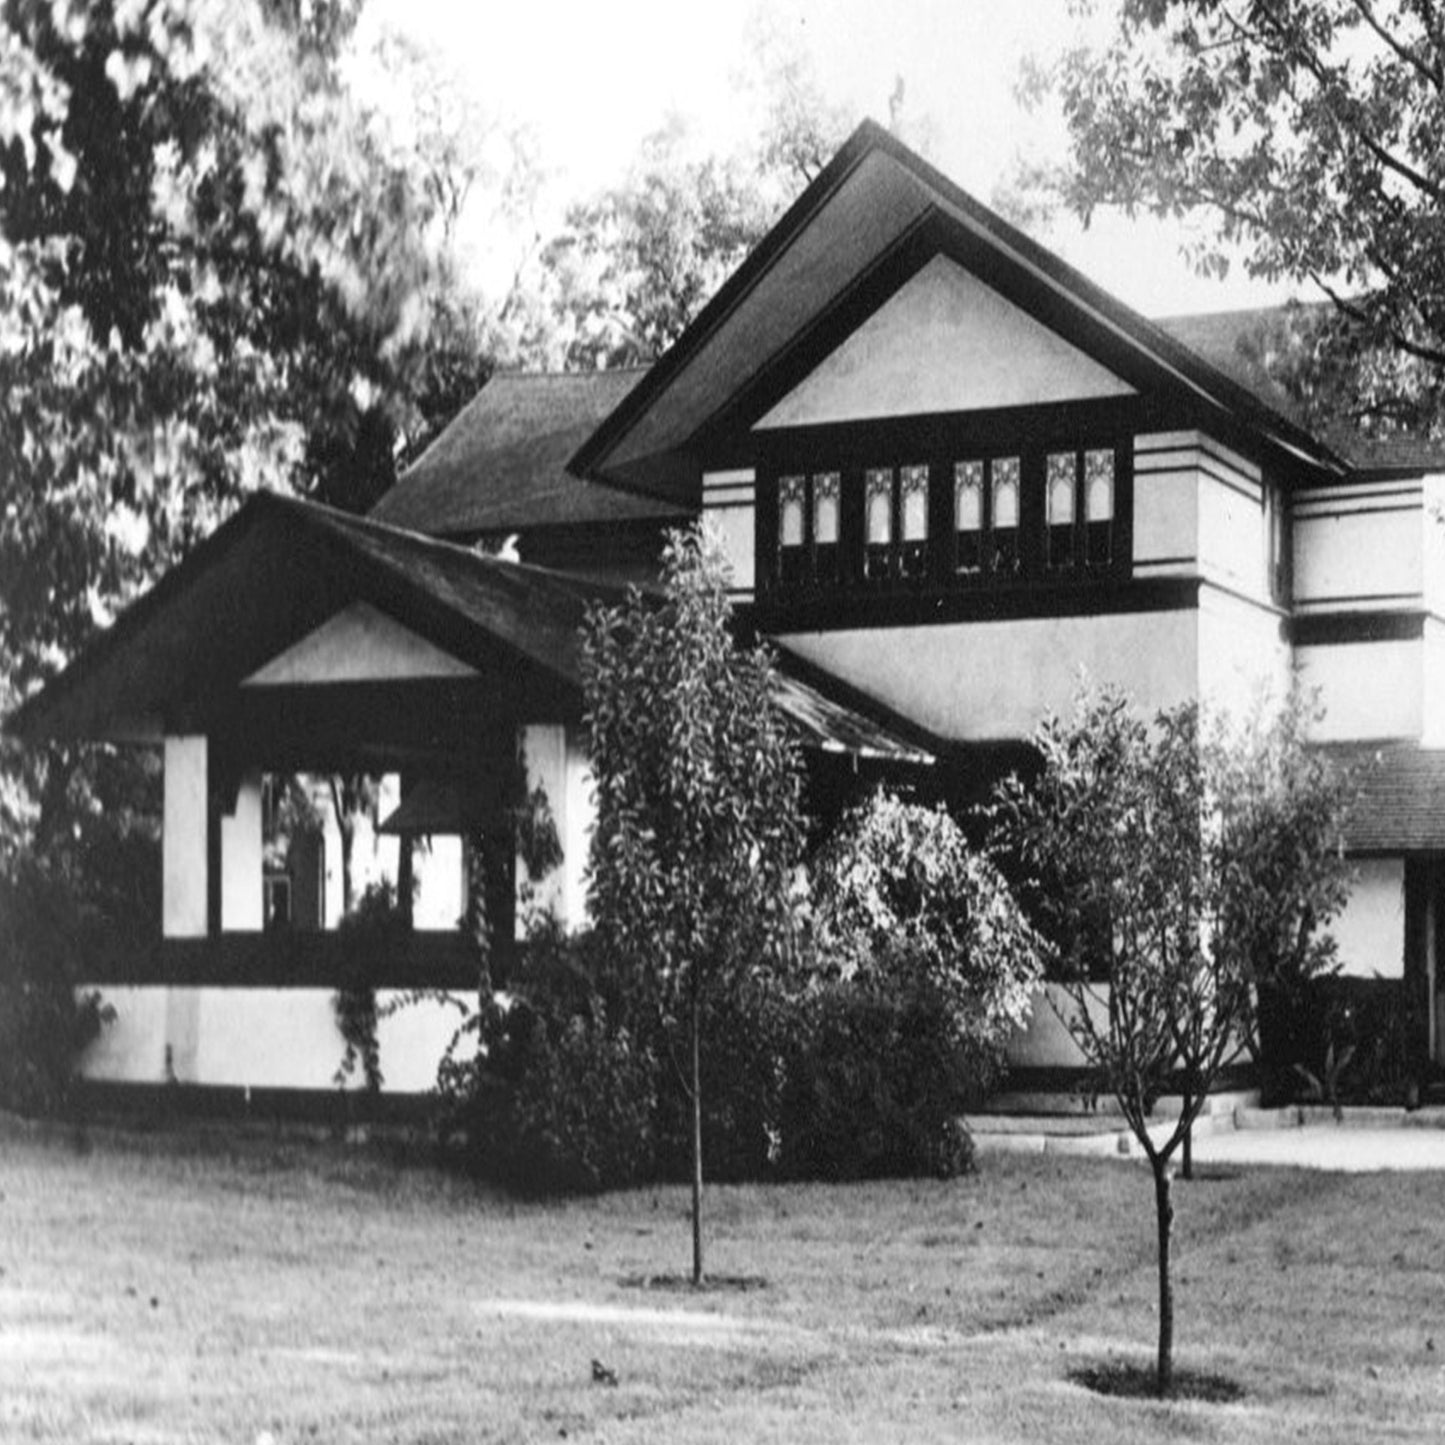 RIVERVIEW HISTORIC DISTRICT 1866-1935: Tales of Villas, Bungalows, Parks and Drives